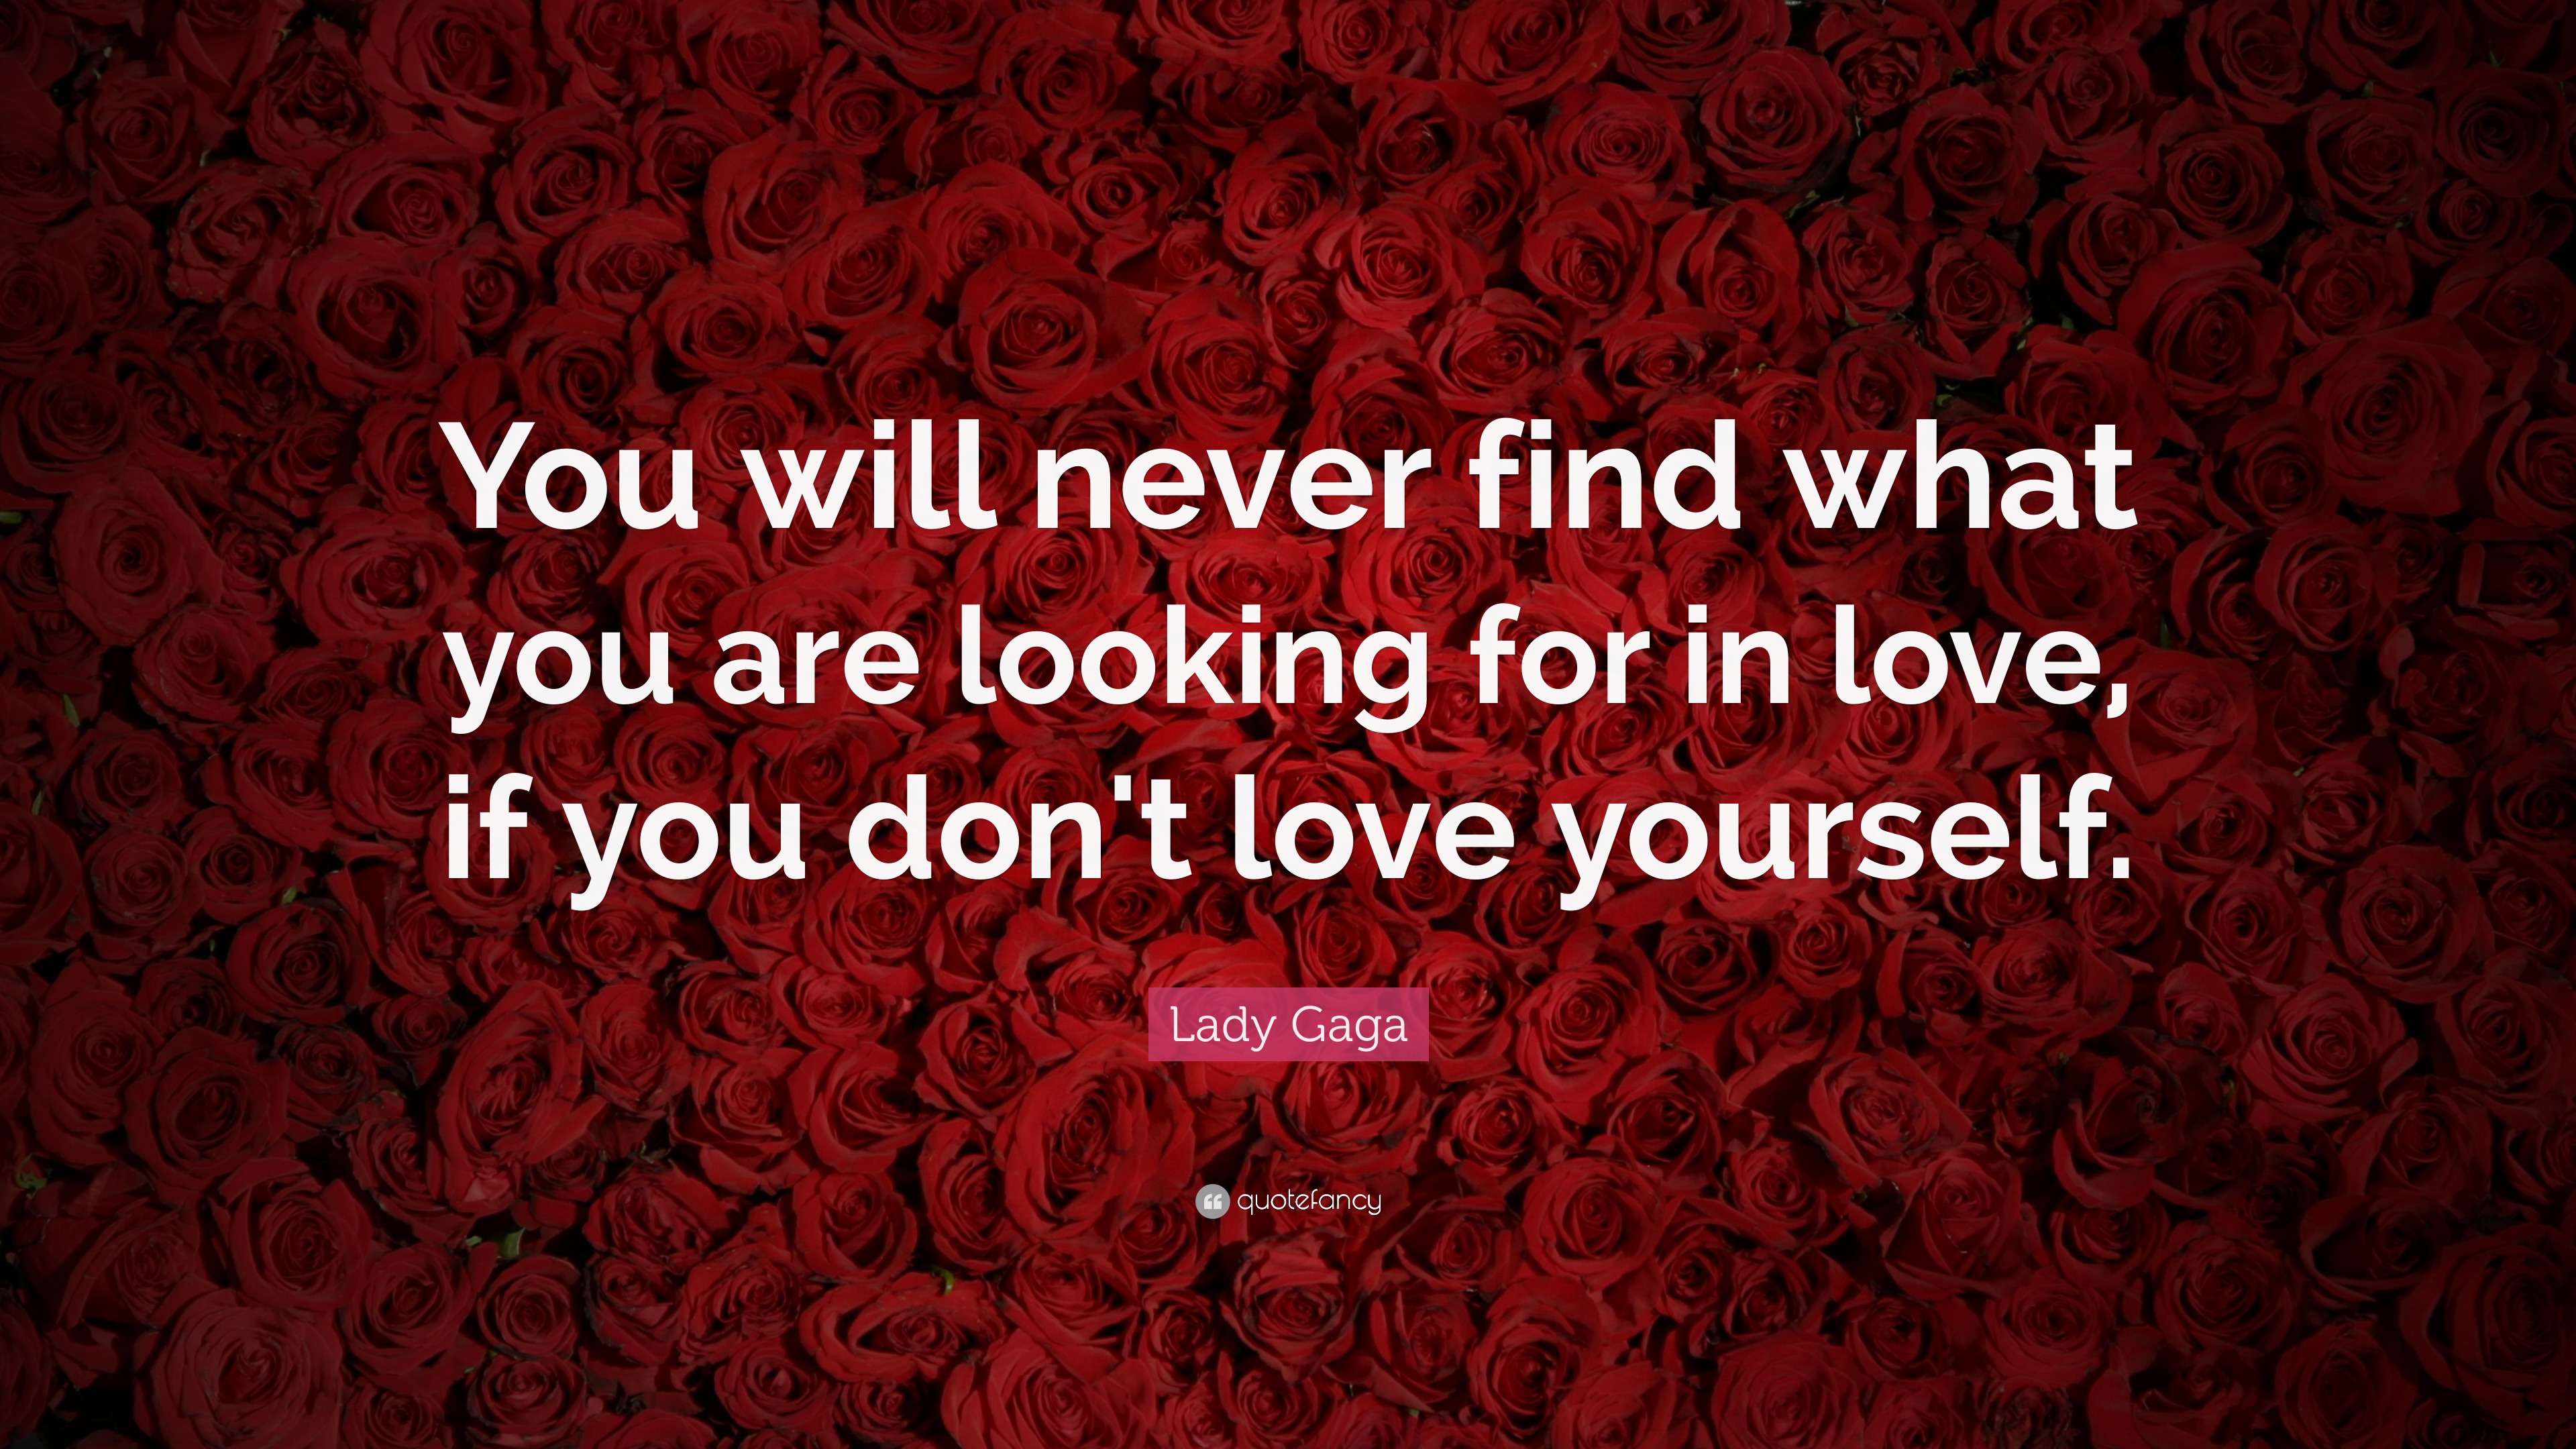 Lady Gaga Quote “You will never find what you are looking for in love